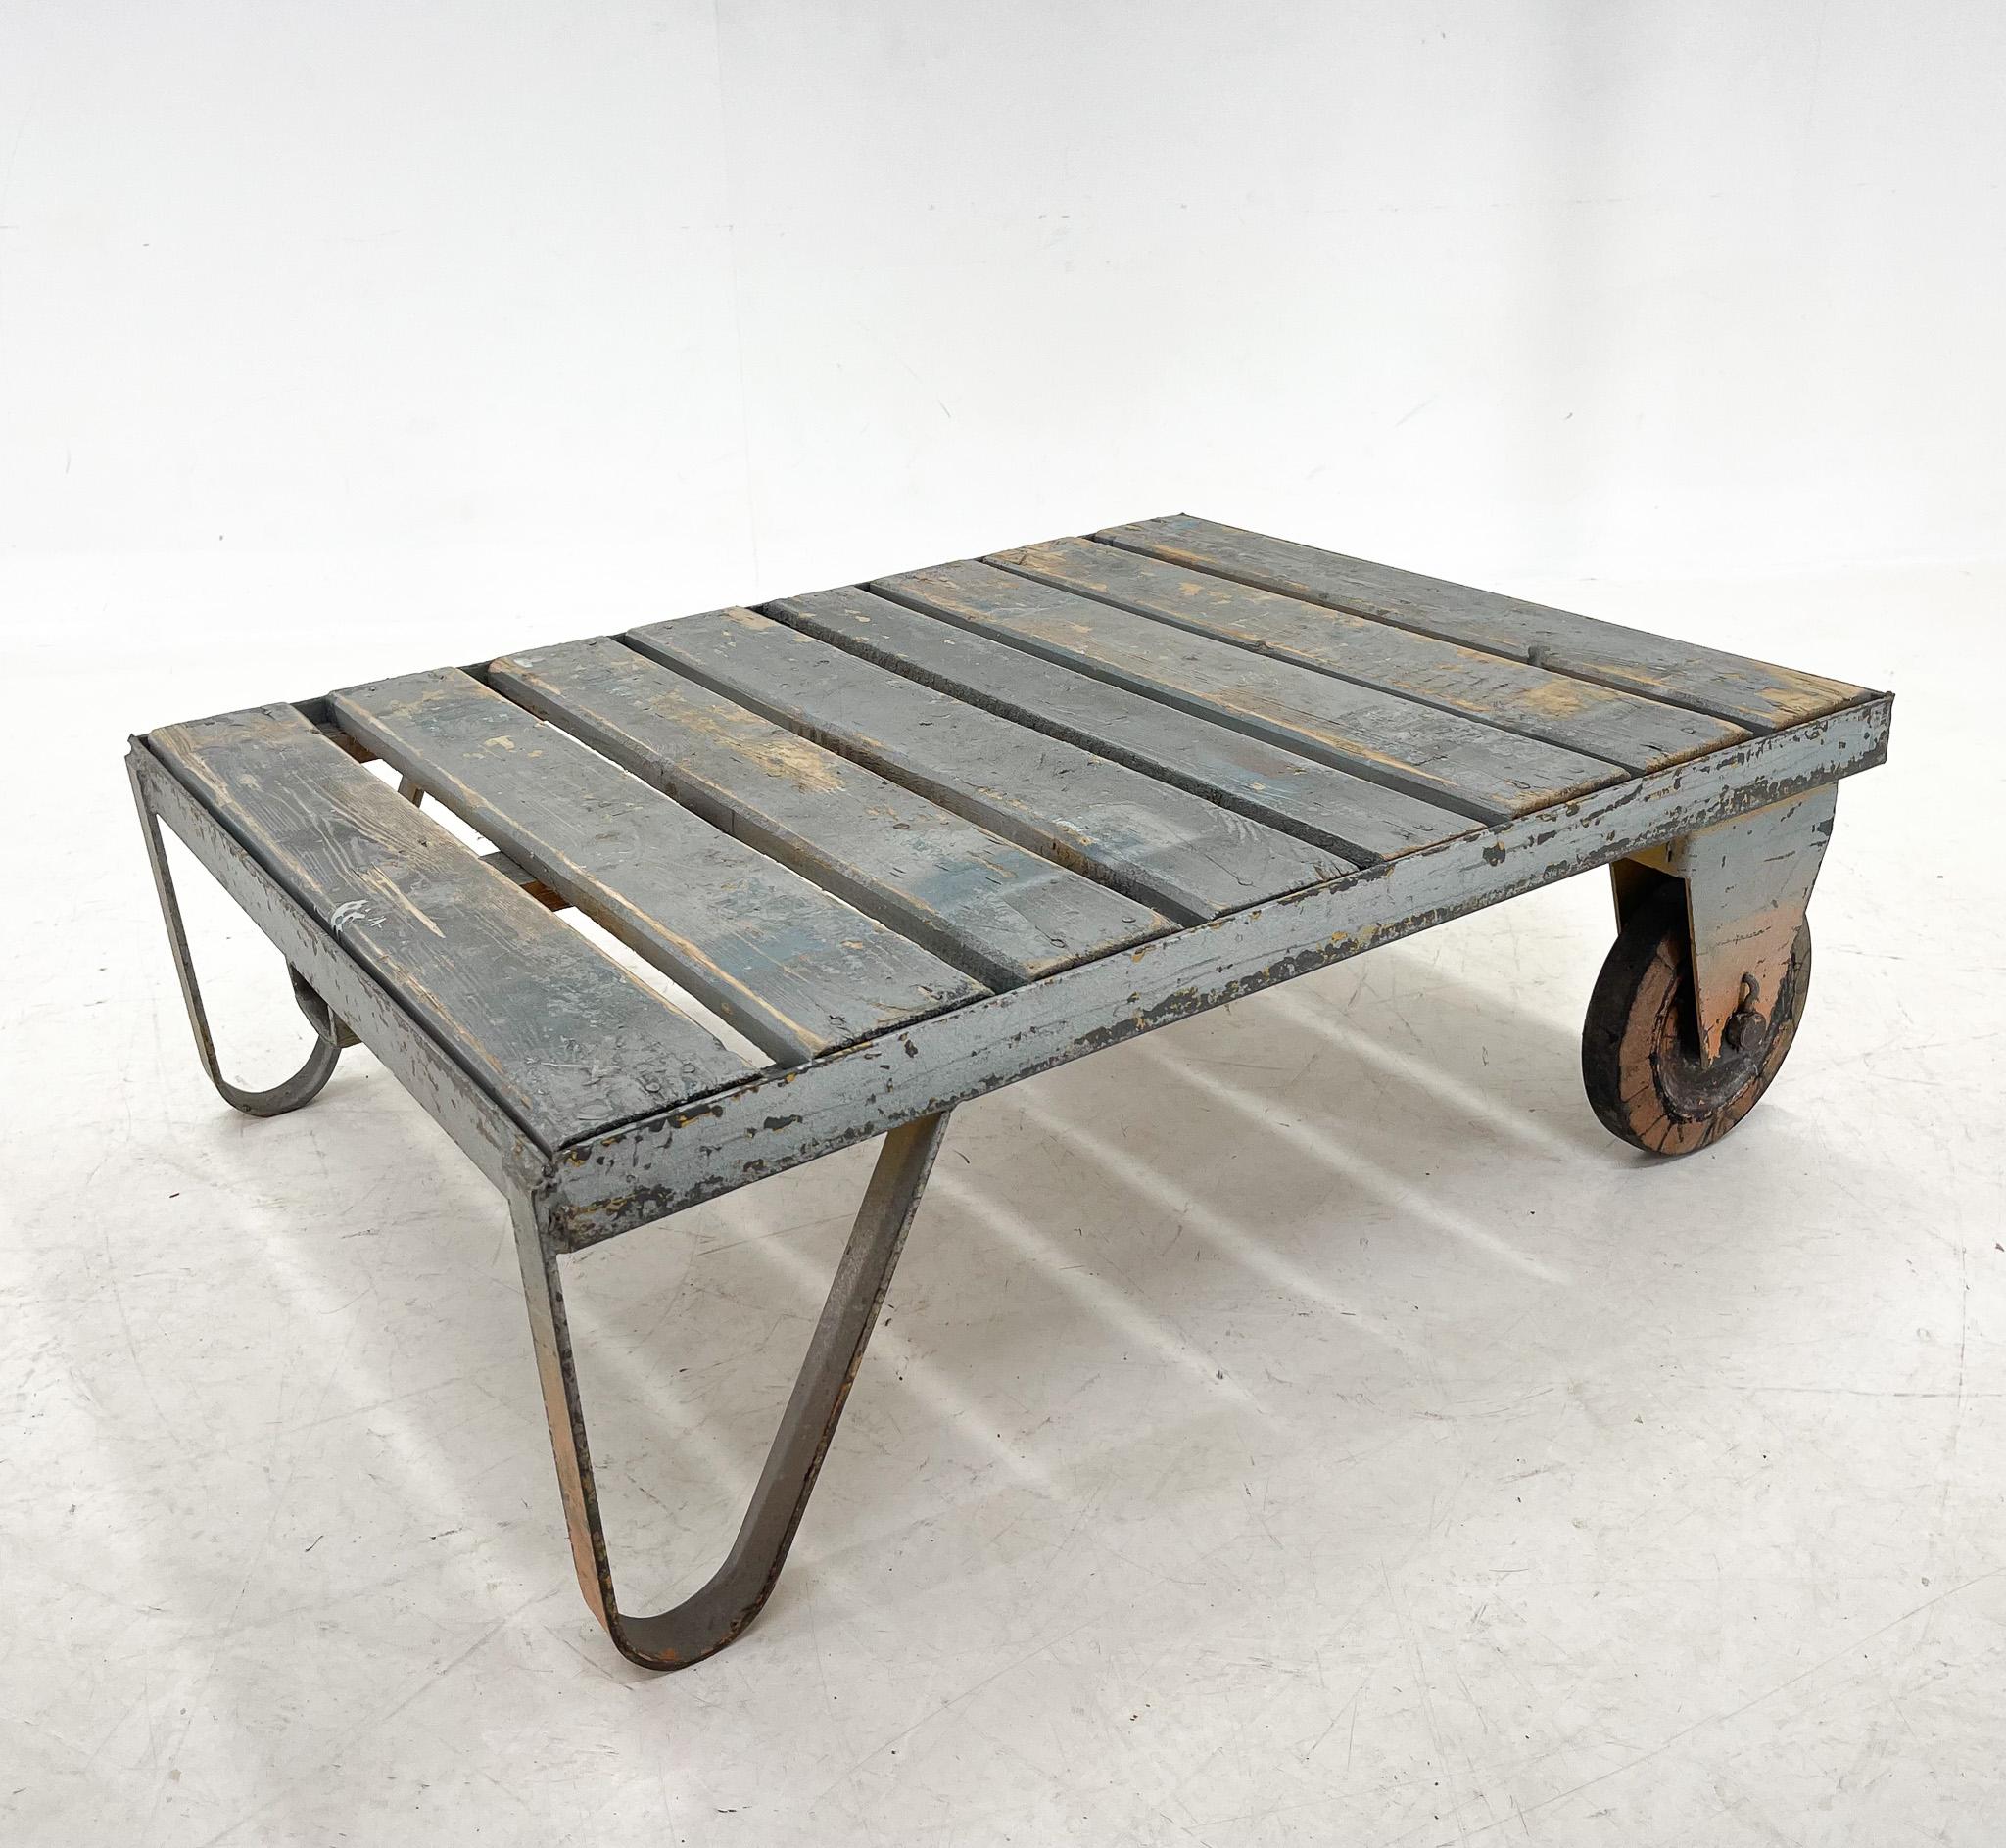 A beautifully time patinated pallet that can be used as a coffee or side table.